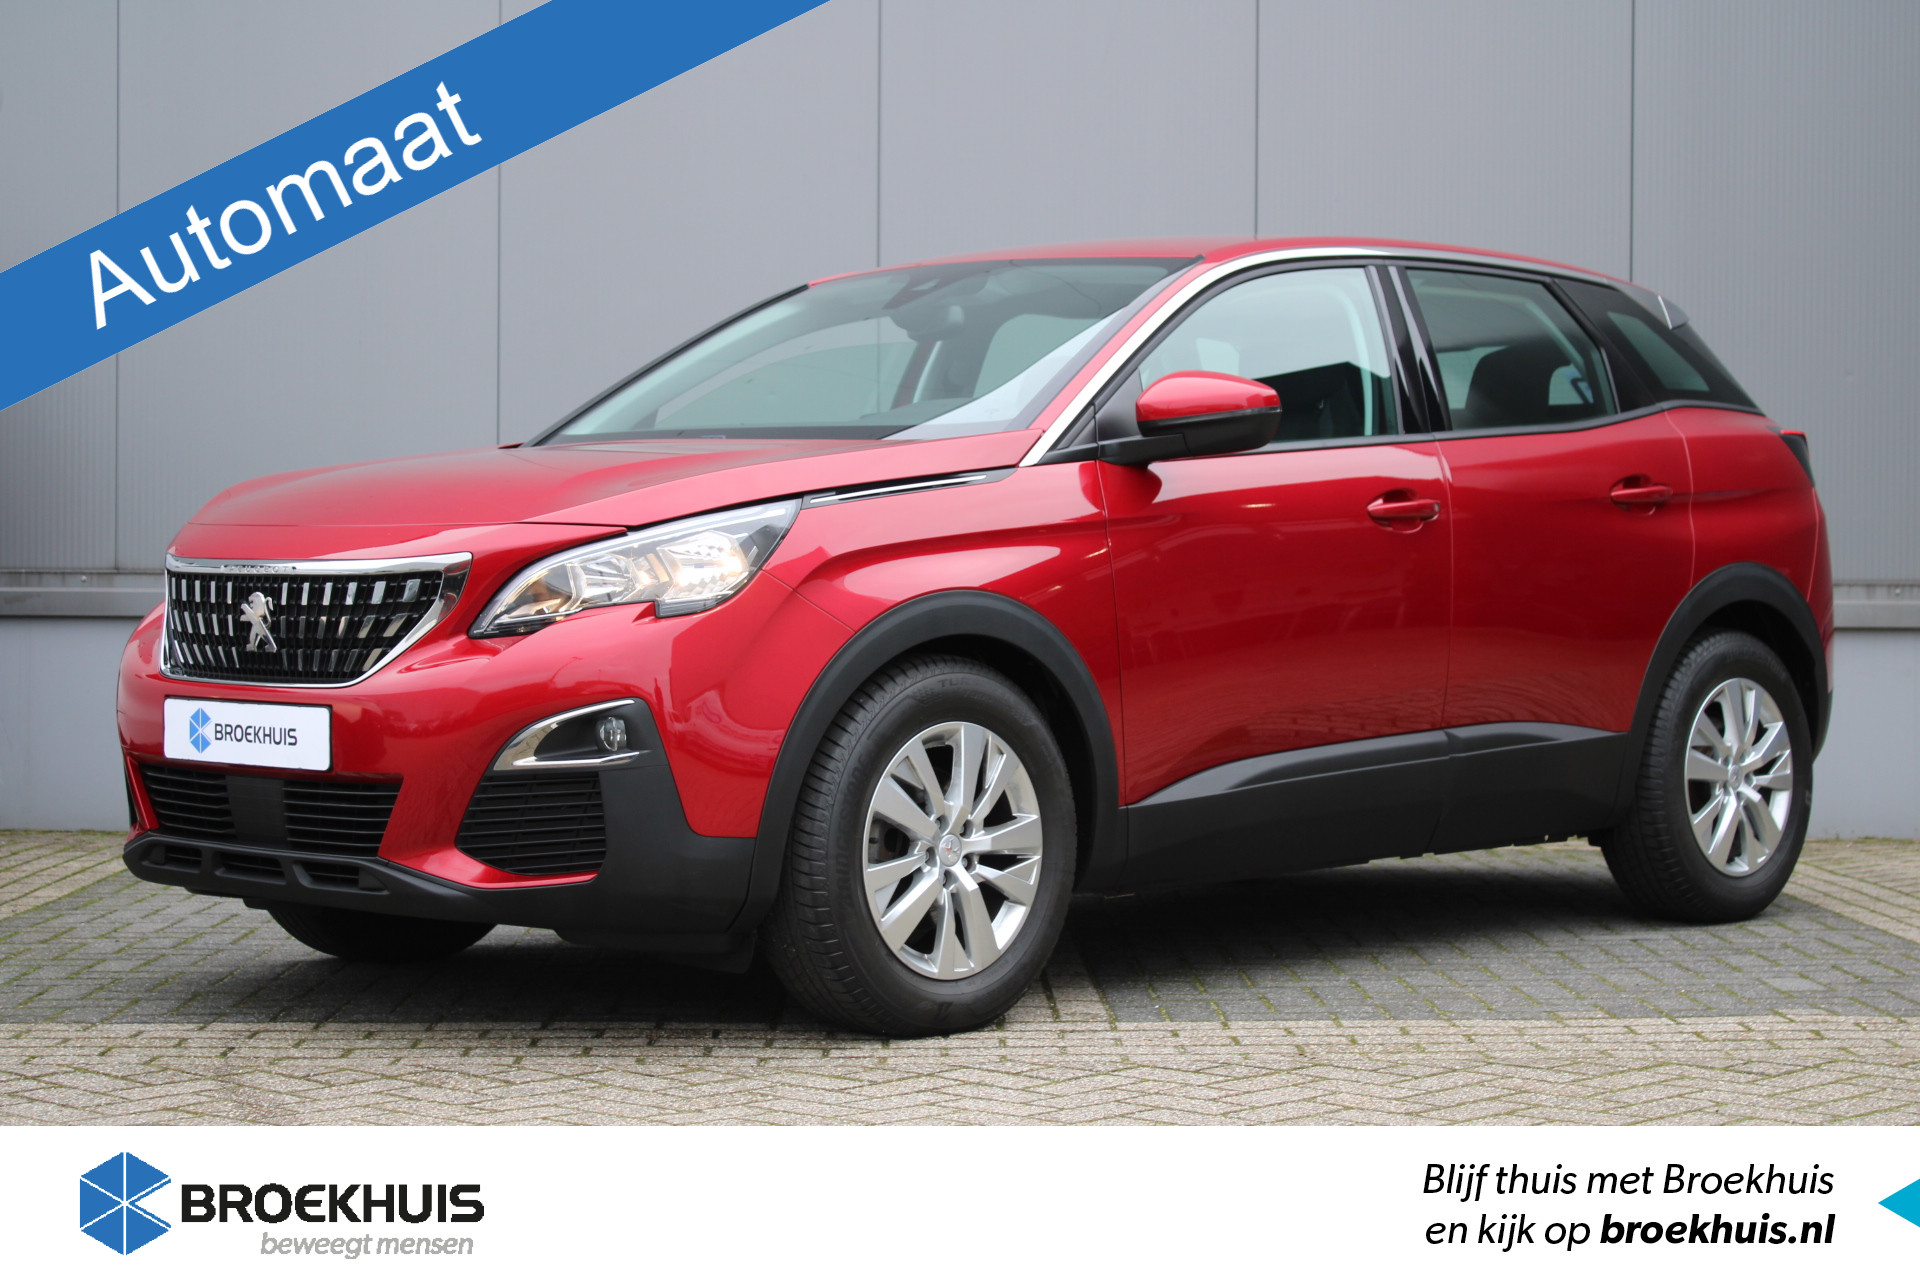 Peugeot 3008 1.2 130pk Active | NAVI BY APP | STOELVERW. | PDC | TREKHAAK | CARPLAY/ANDROID AUTO | CLIMA | CRUISE | bij viaBOVAG.nl